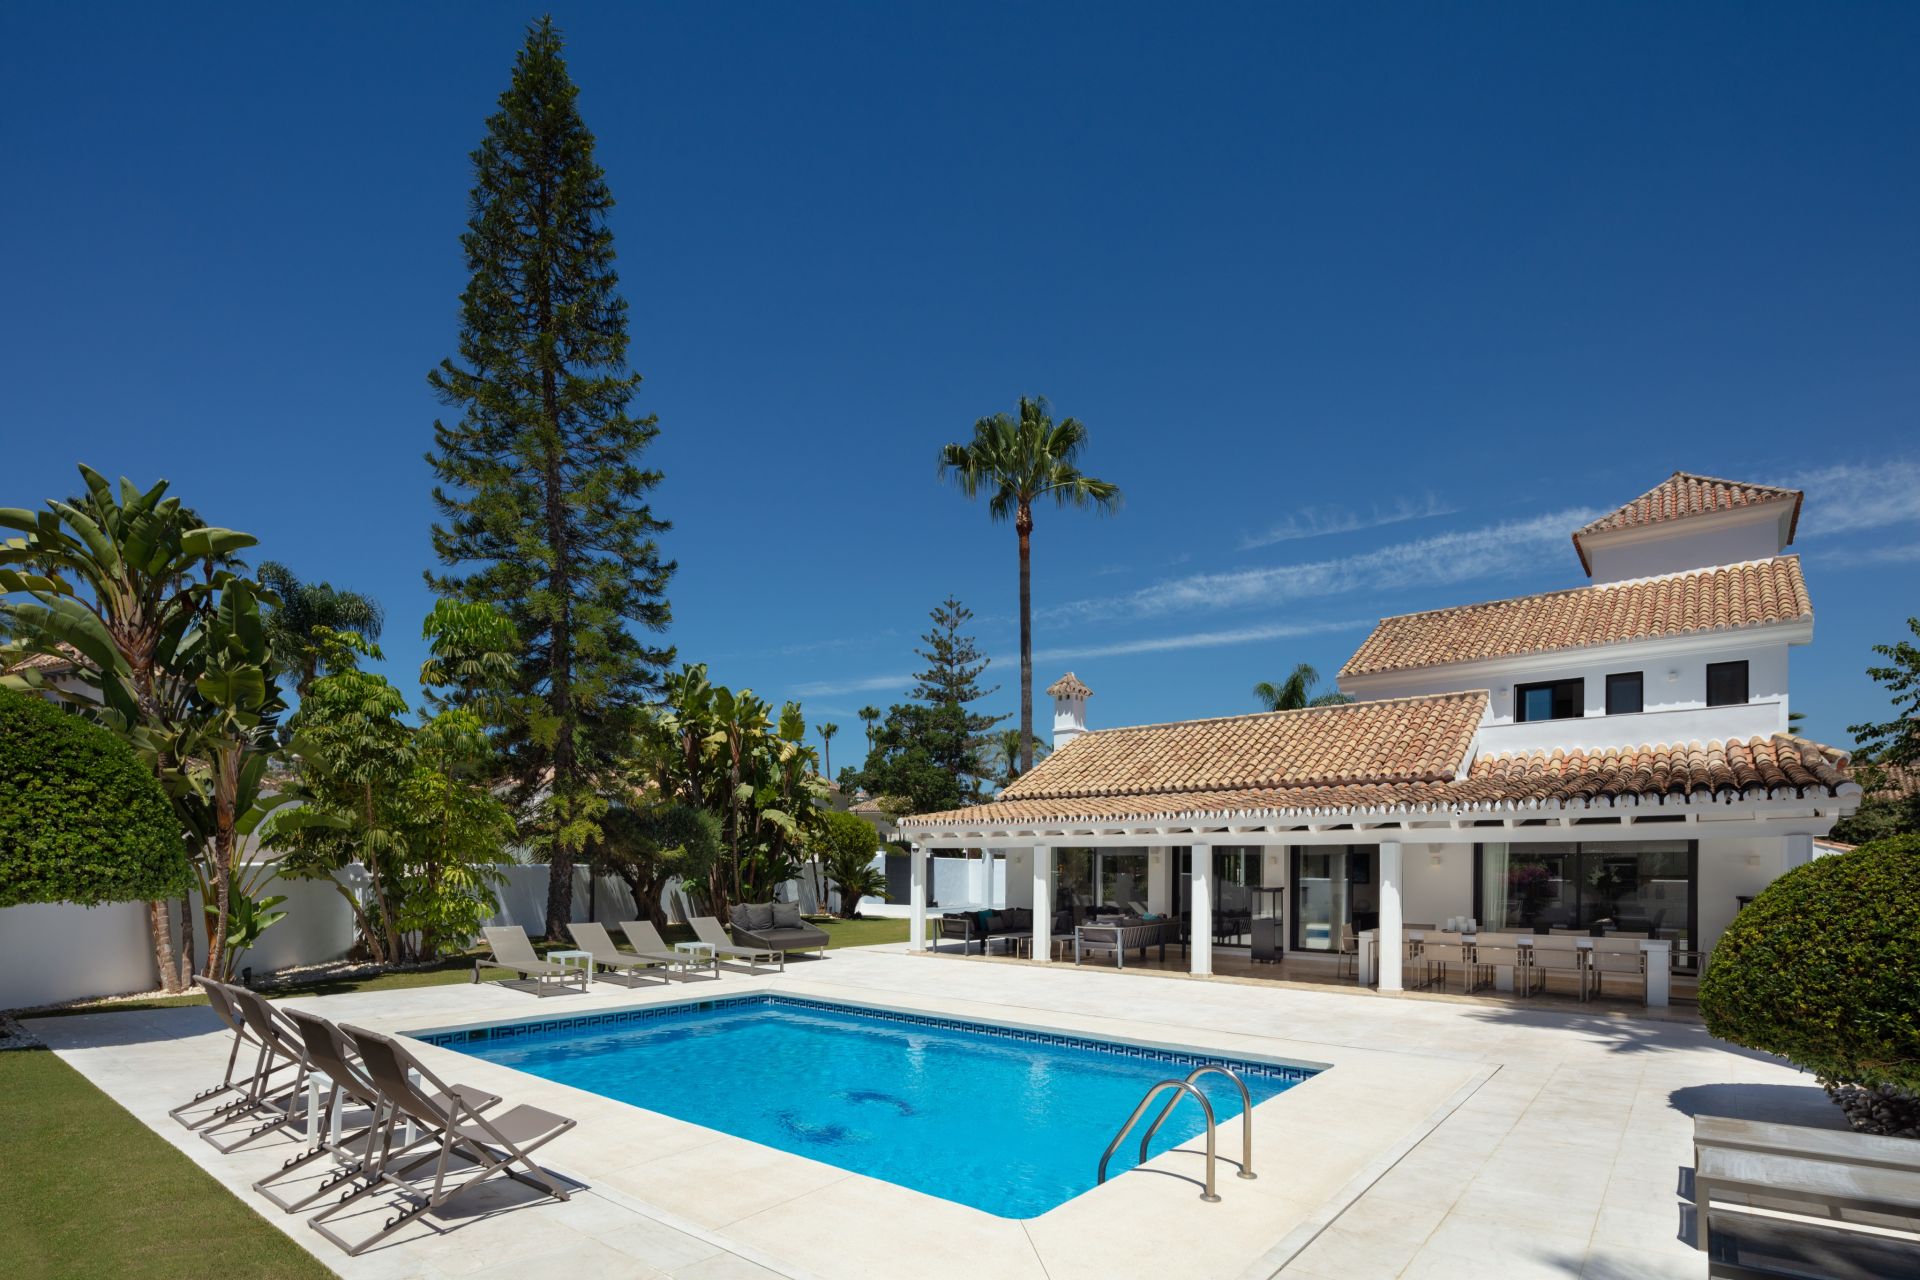 Fantastic family villa in the heart of the Golf Valley in Marbella